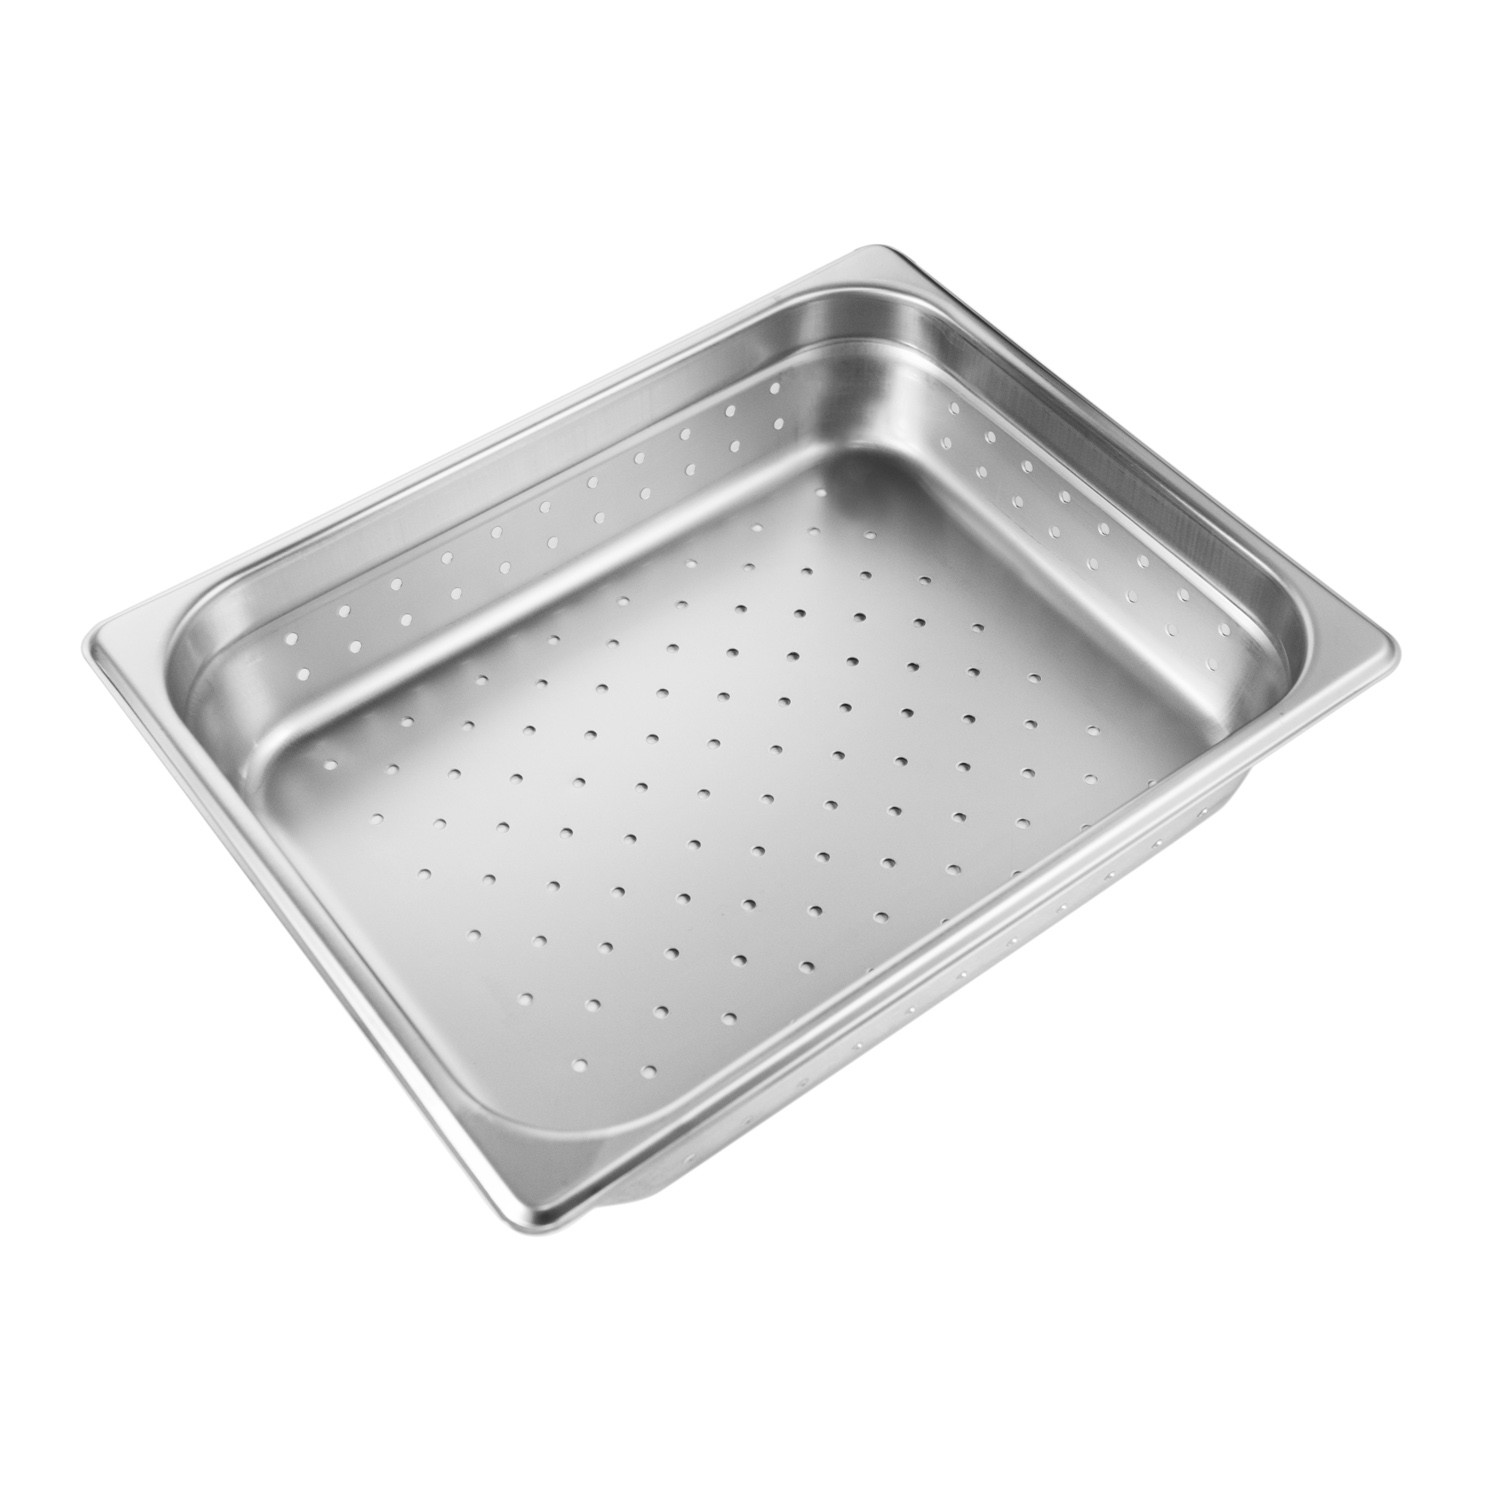 CAC China SSPH-25-2P Half Size 25-Gauge Perforated Stainless Steel Steam Pan 2 1/2"